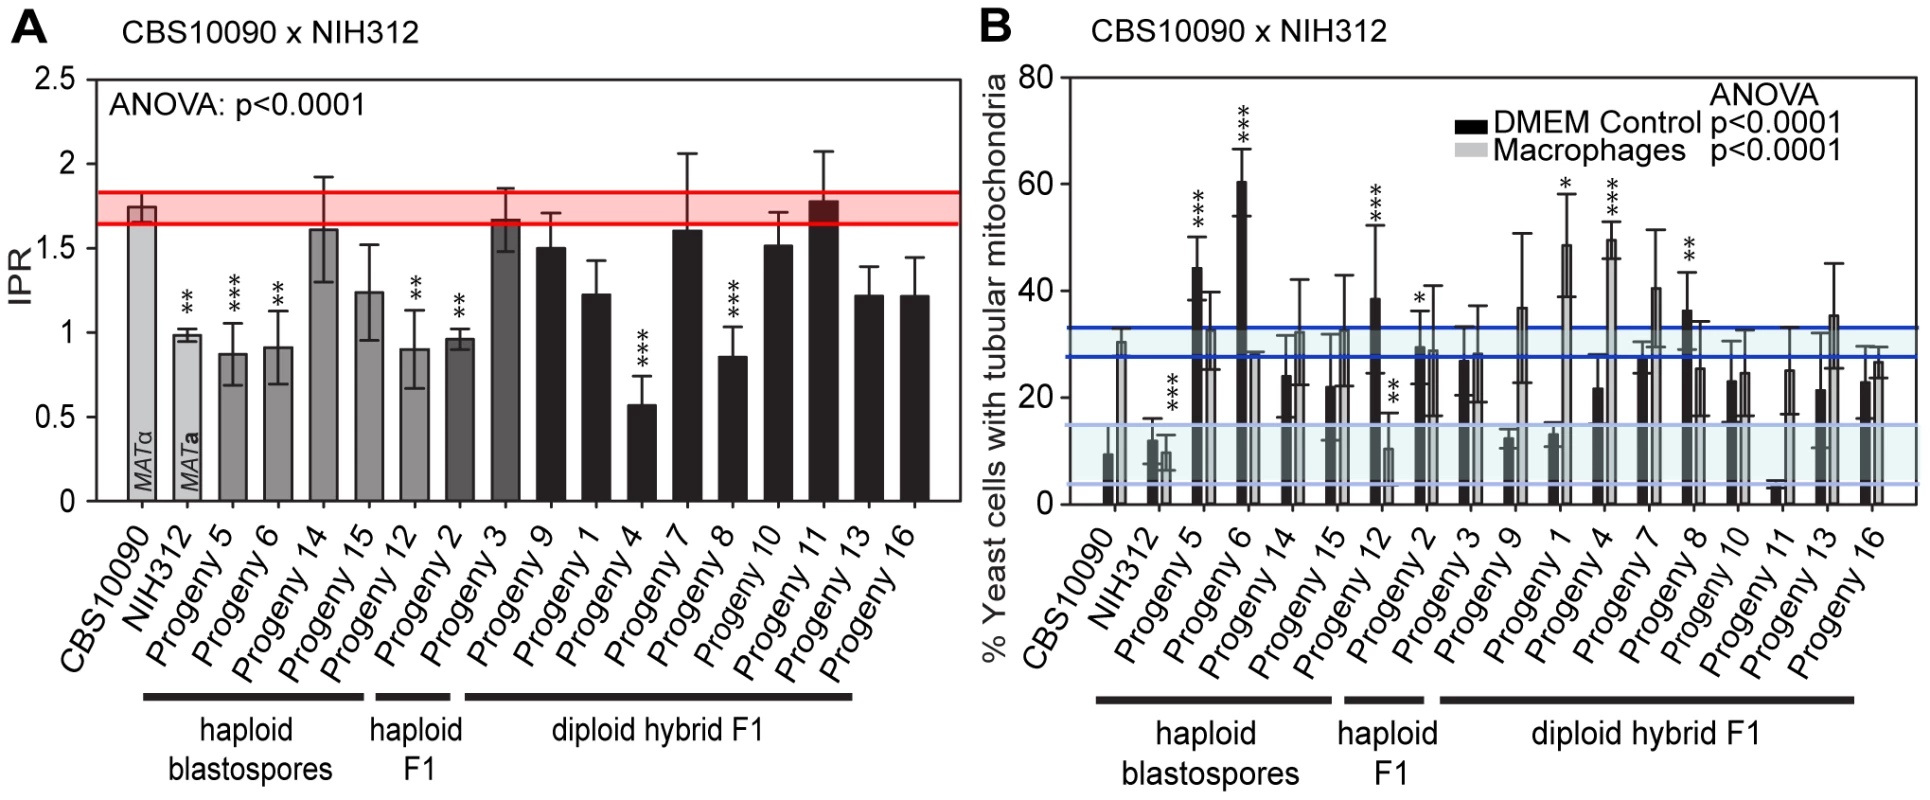 Macrophage interaction of progeny from outgroup crosses between CBS10090 and NIH312.